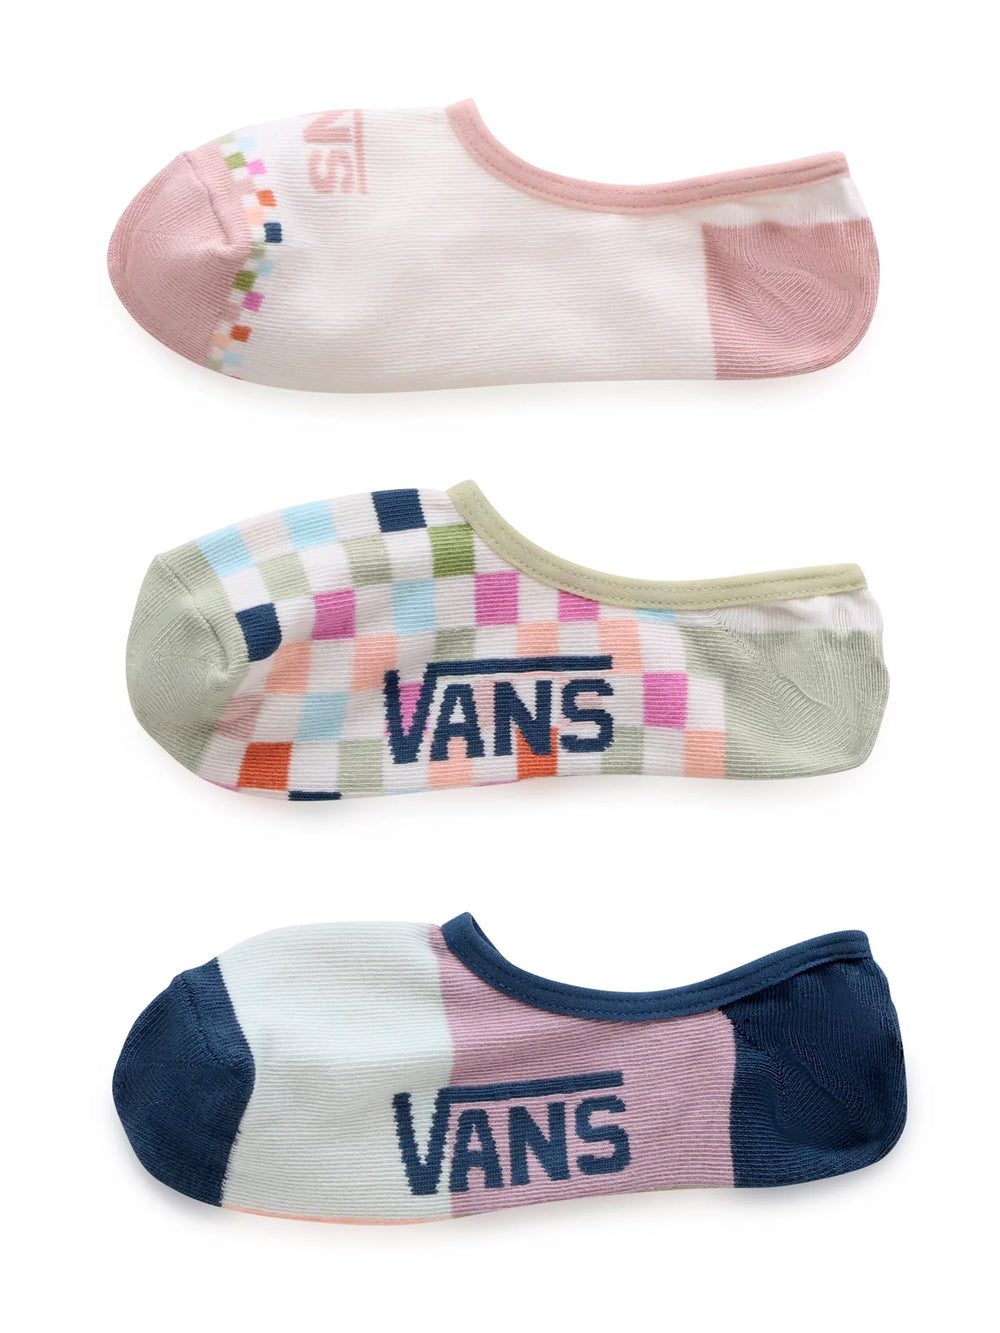 VANS CHECK YES CANOODLE 3 PACKS - DÉSTOCKAGE